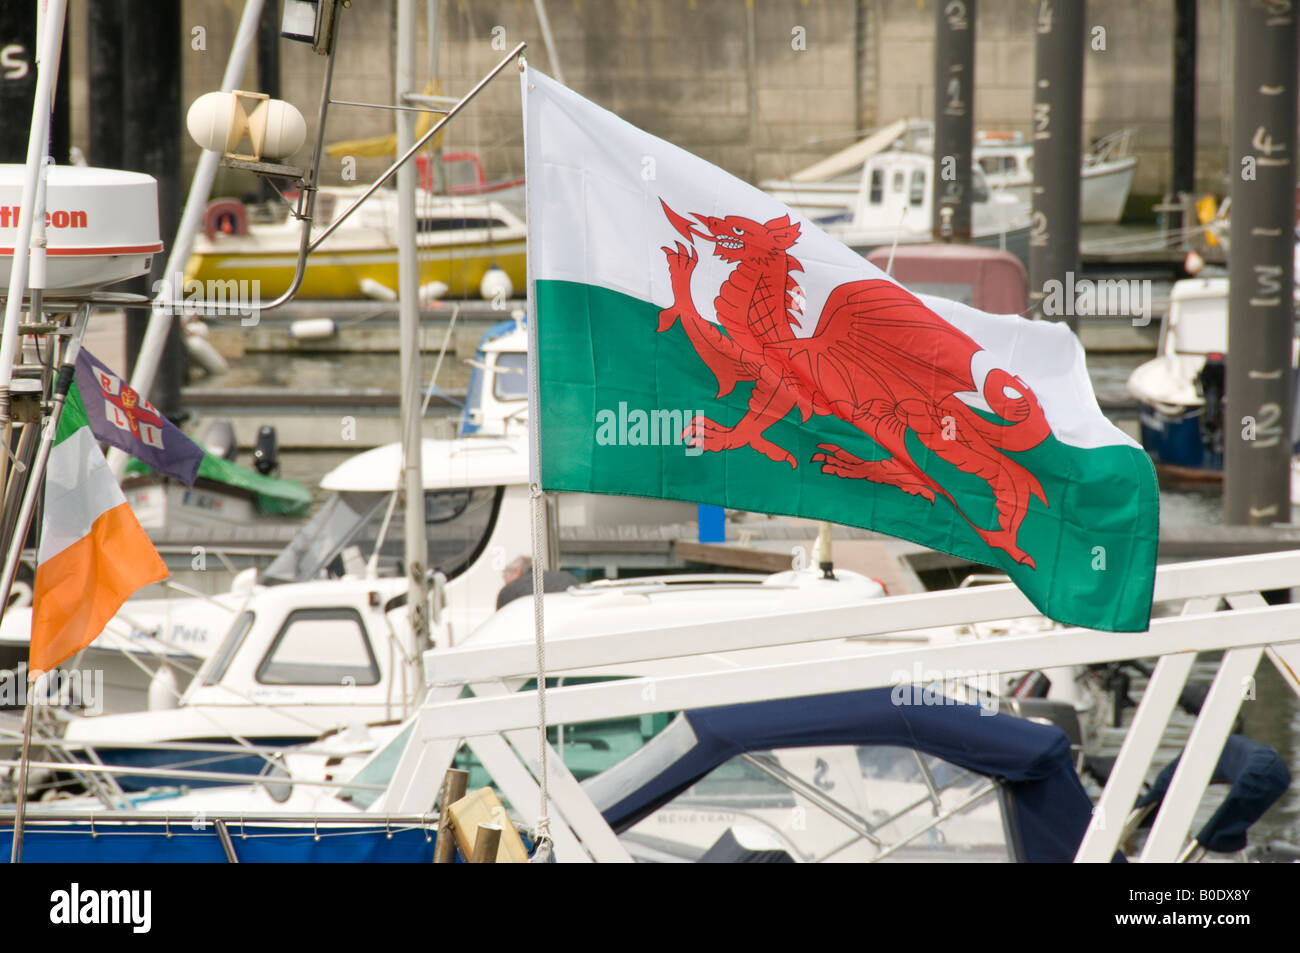 red dragon welsh flag banner flying on boat in Aberystwyth marina Stock Photo